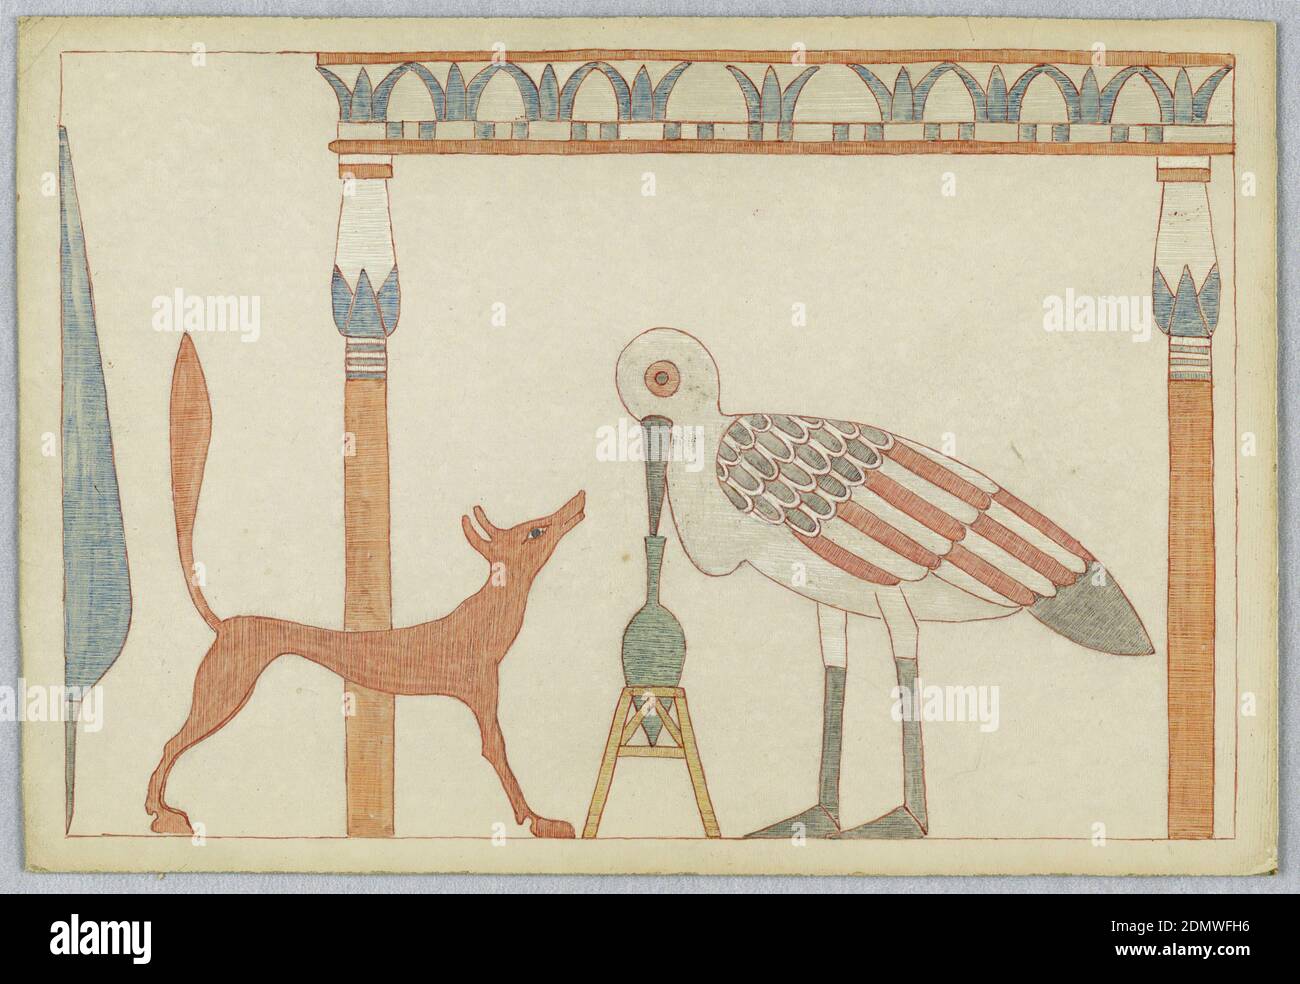 The Fox and the Stork, Illustration for Aesop's Fables, Victor Wilbour, Pen and red ink, crayon on white board, Stork facing left in profile, its beak in a vase, center. Fox at left, in right profile. Two columns in Egyptian style., USA, ca. 1916, Drawing Stock Photo